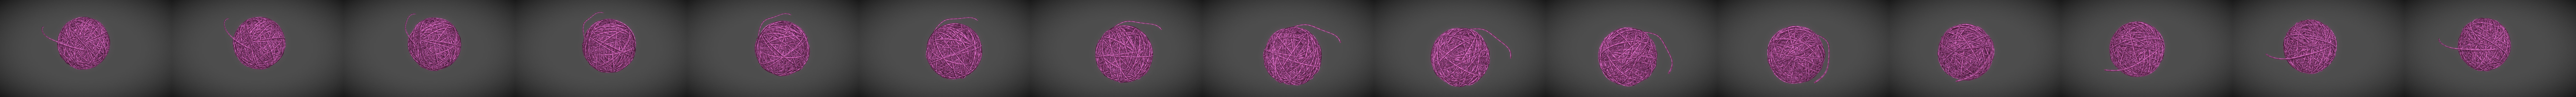 129,364 Yarn Balls Images, Stock Photos, 3D objects, & Vectors